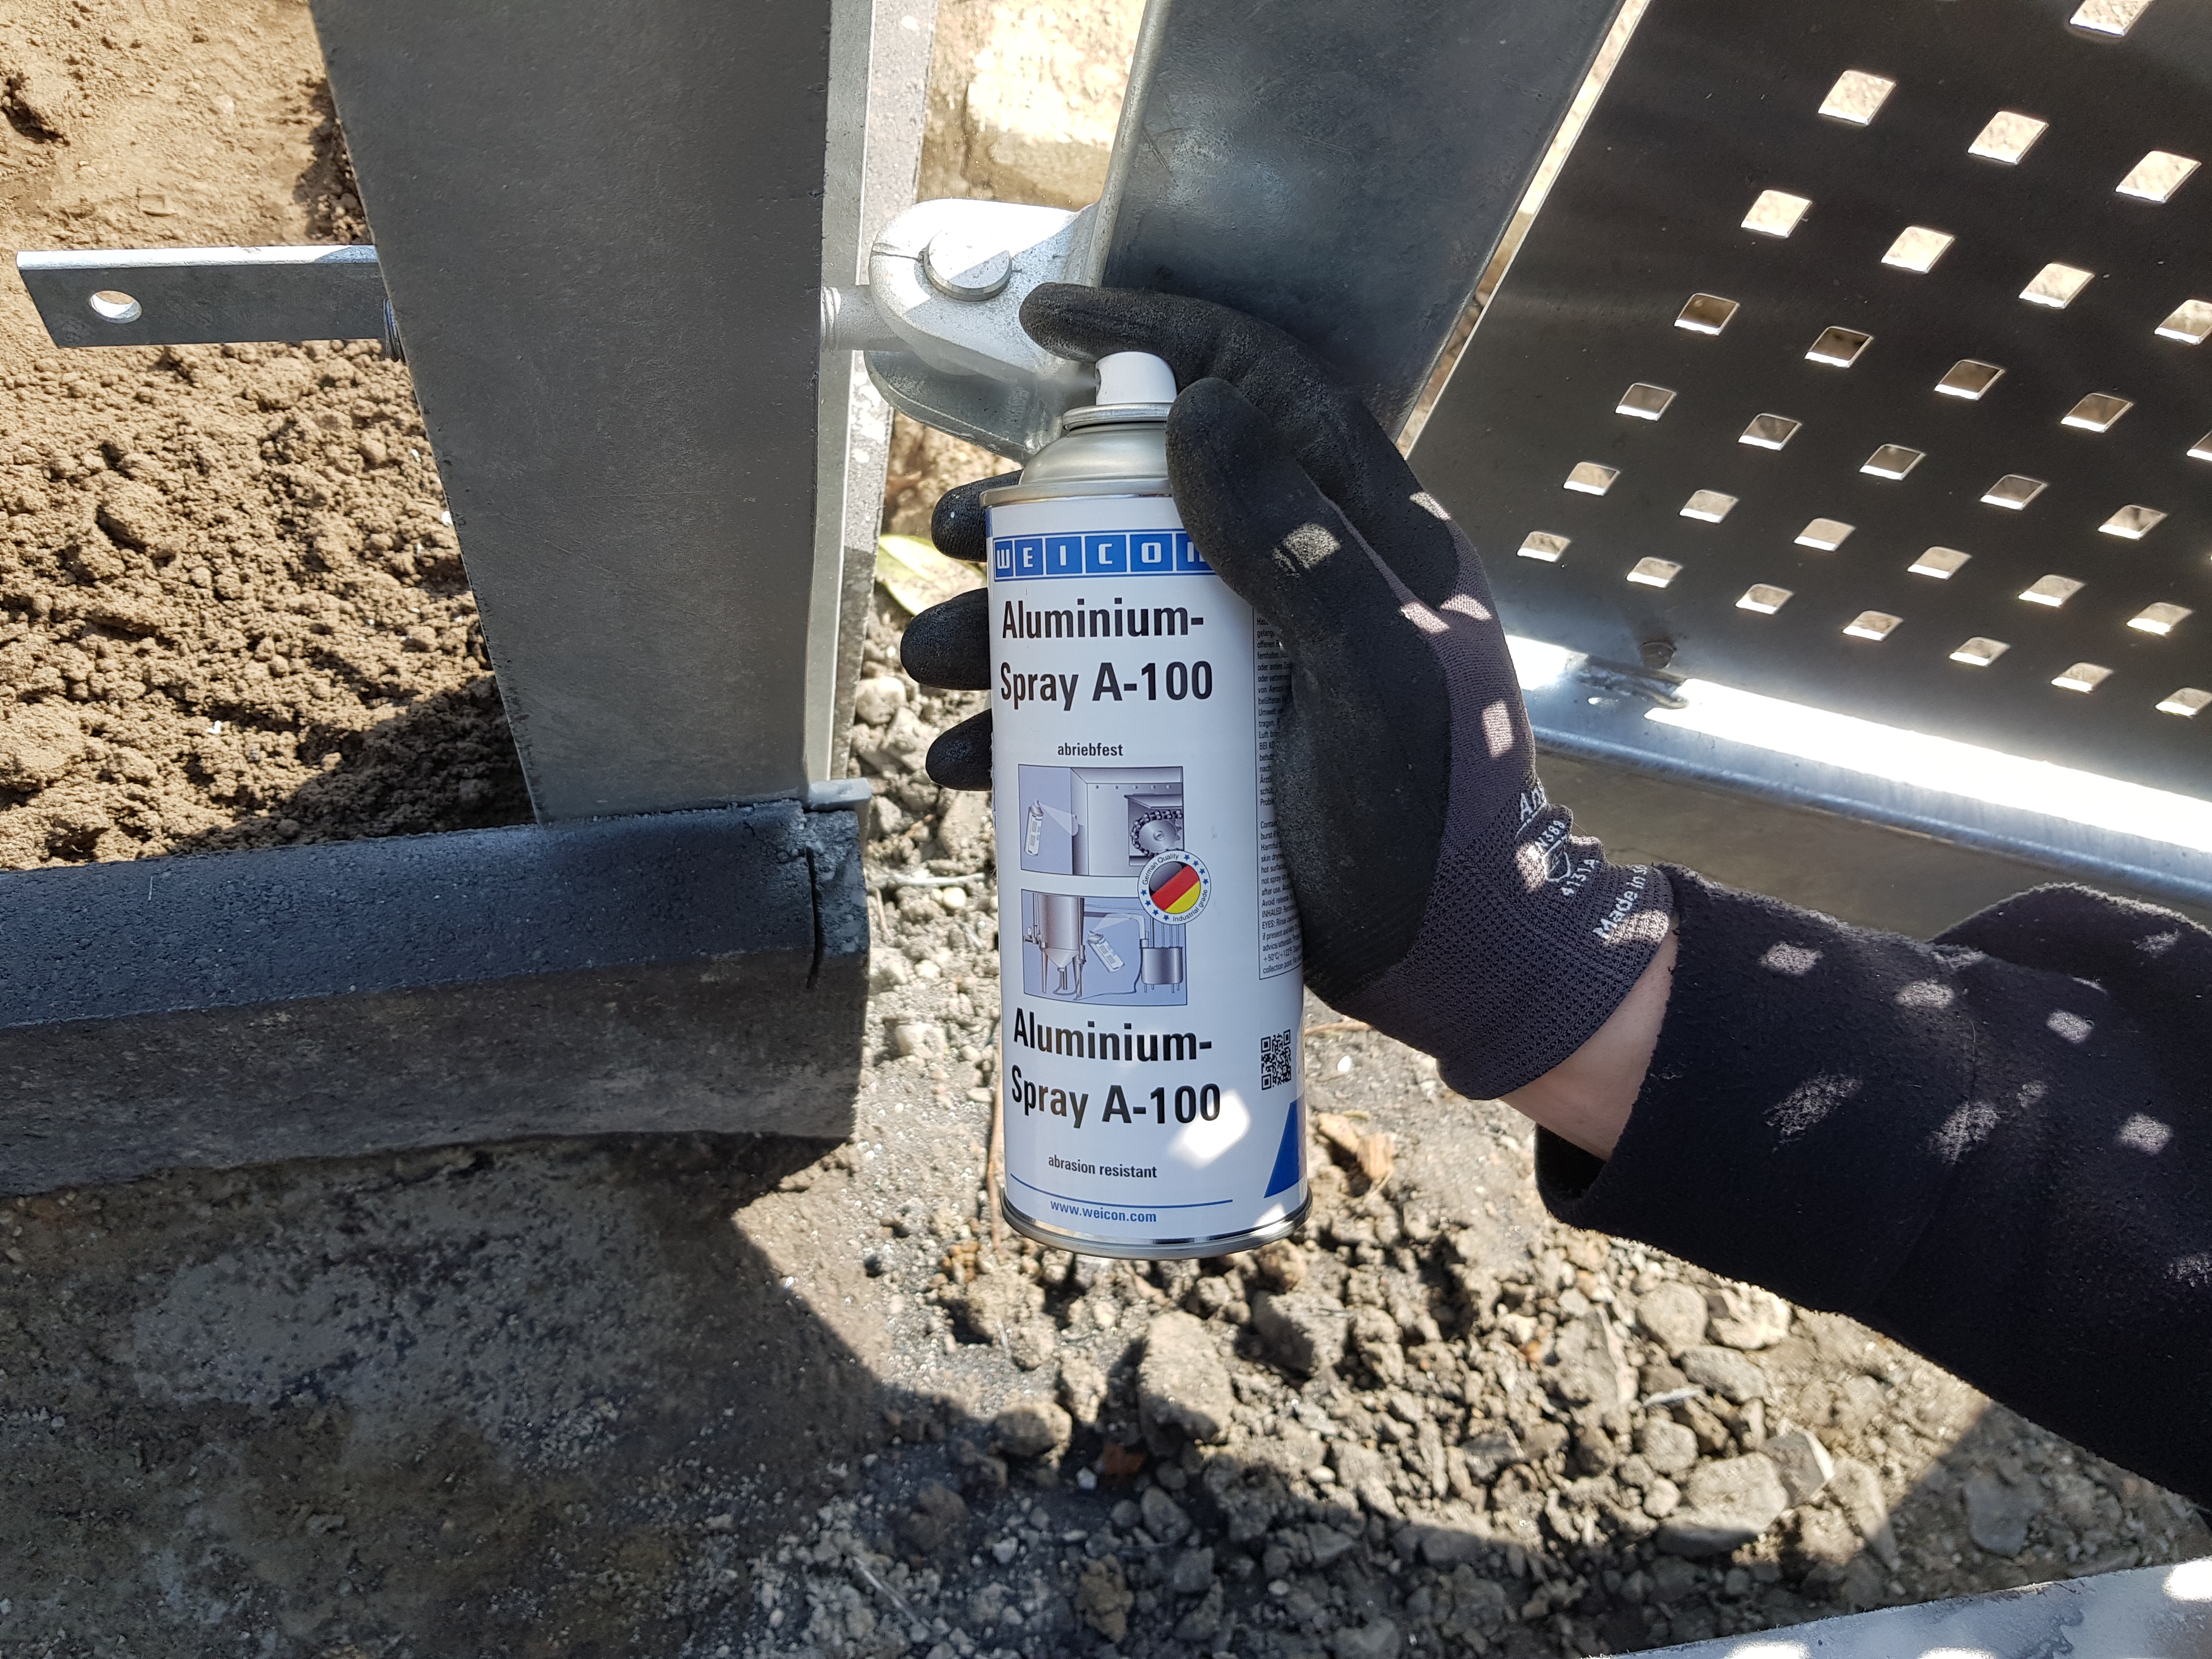 Aluminium Spray A-100 | abrasion-resistant protetcion against rust and corrosion